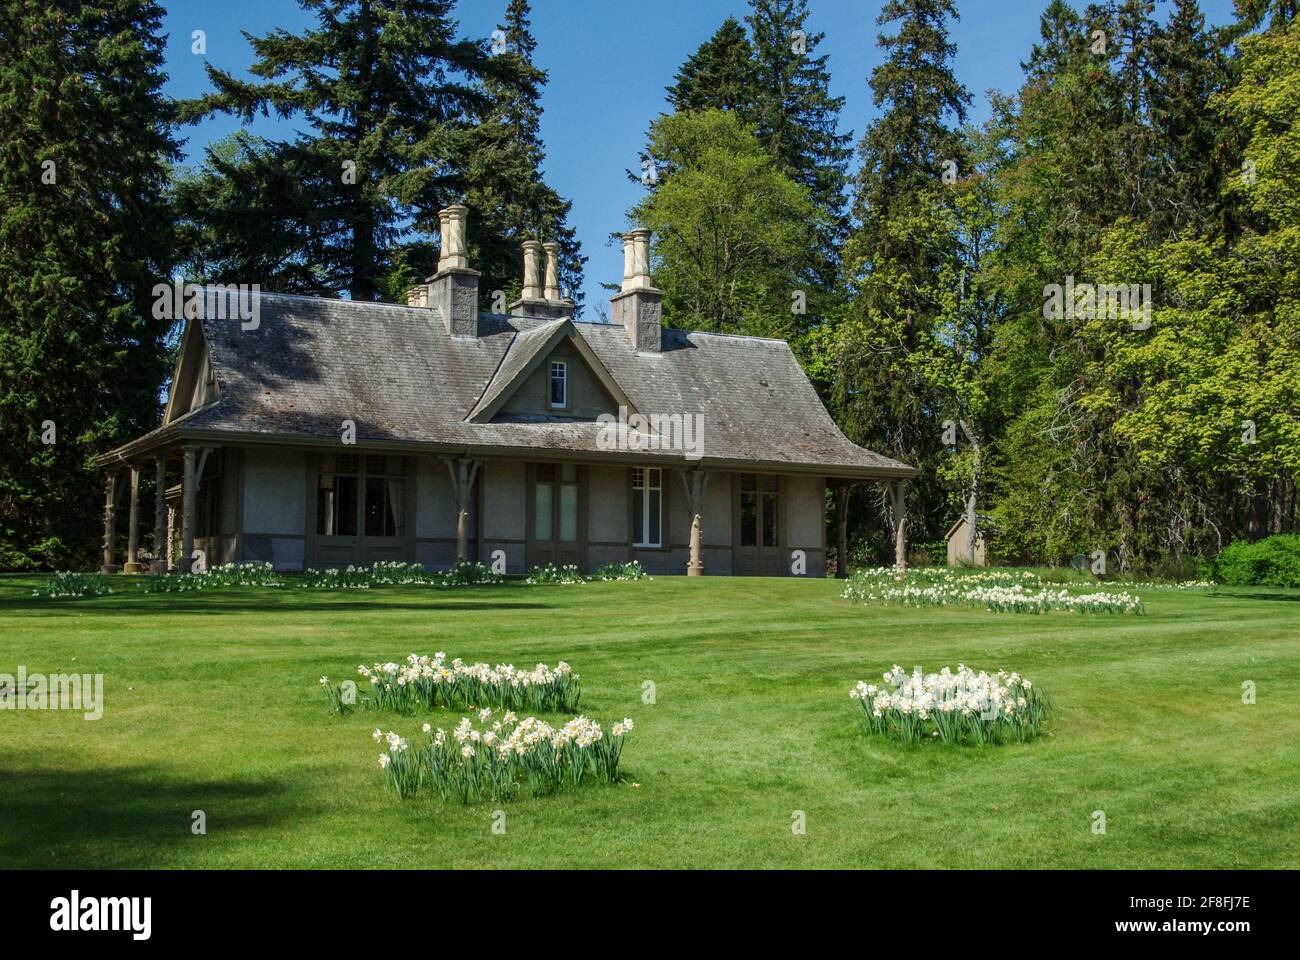 Garden Cottage in the grounds of Balmoral Castle, Scotland; dating from 1895 it was used extensively by Queen Victoria. Stock Photo